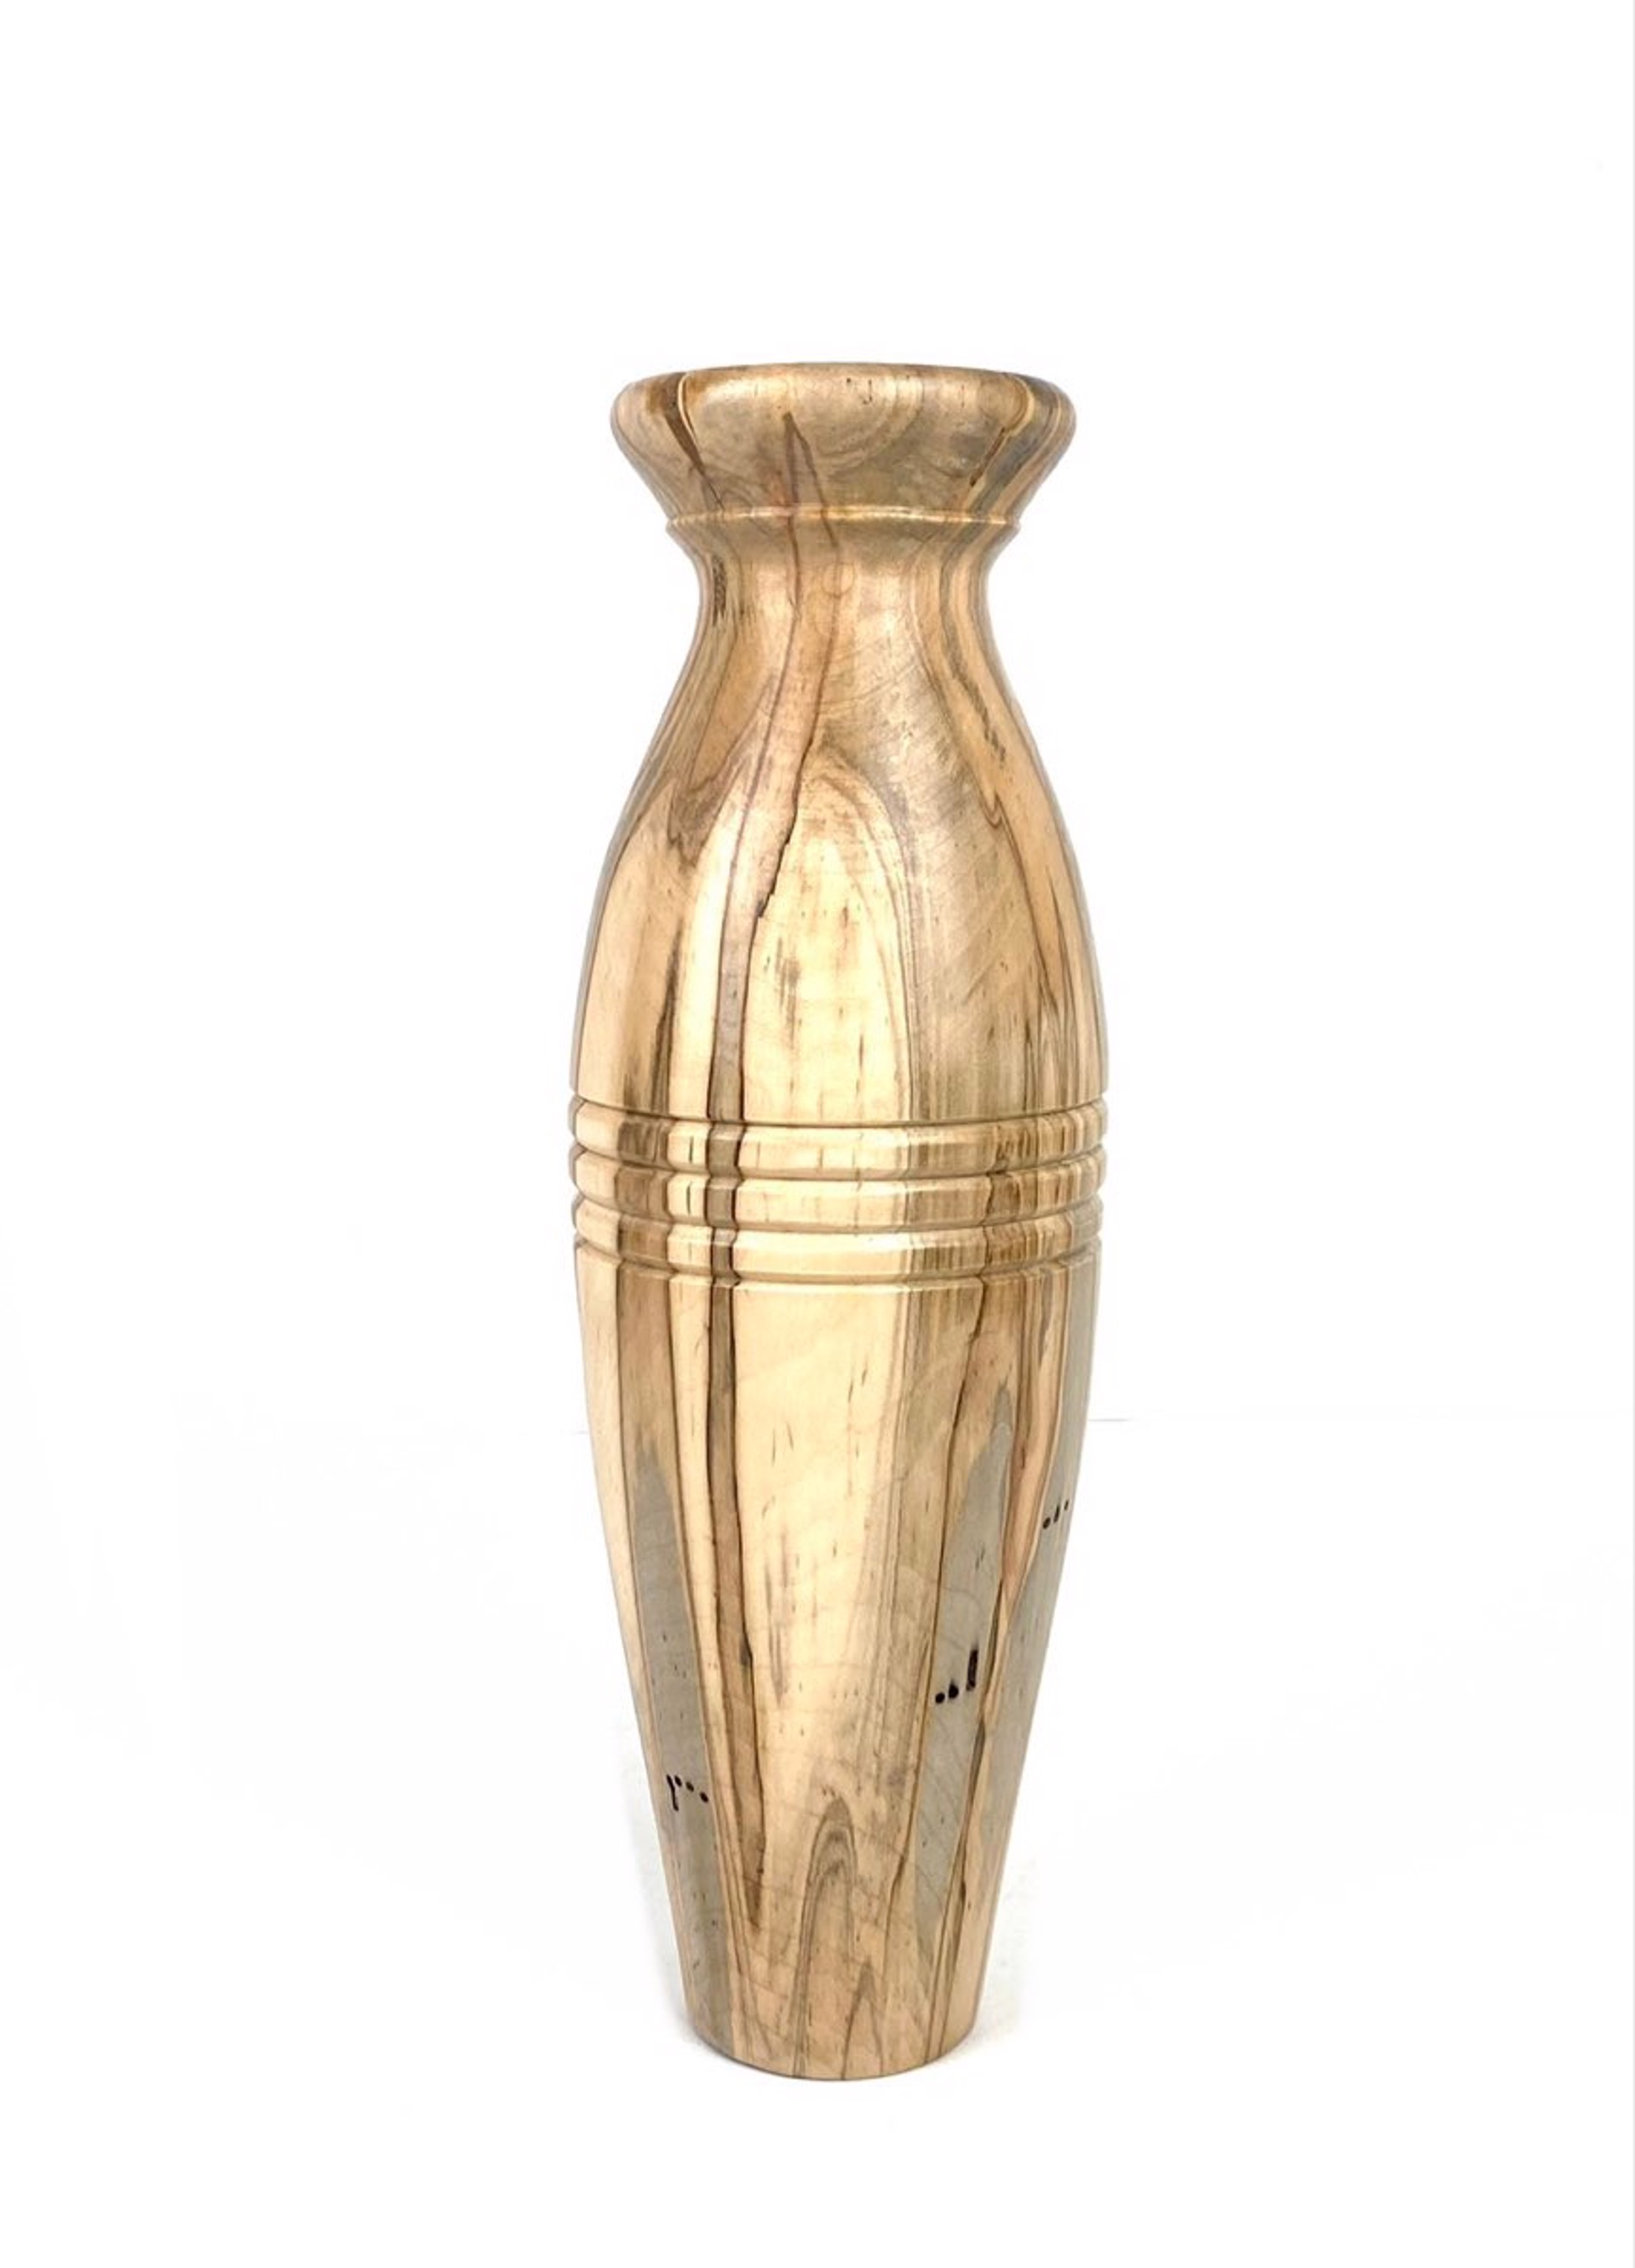 Maple Vase by Don Moore